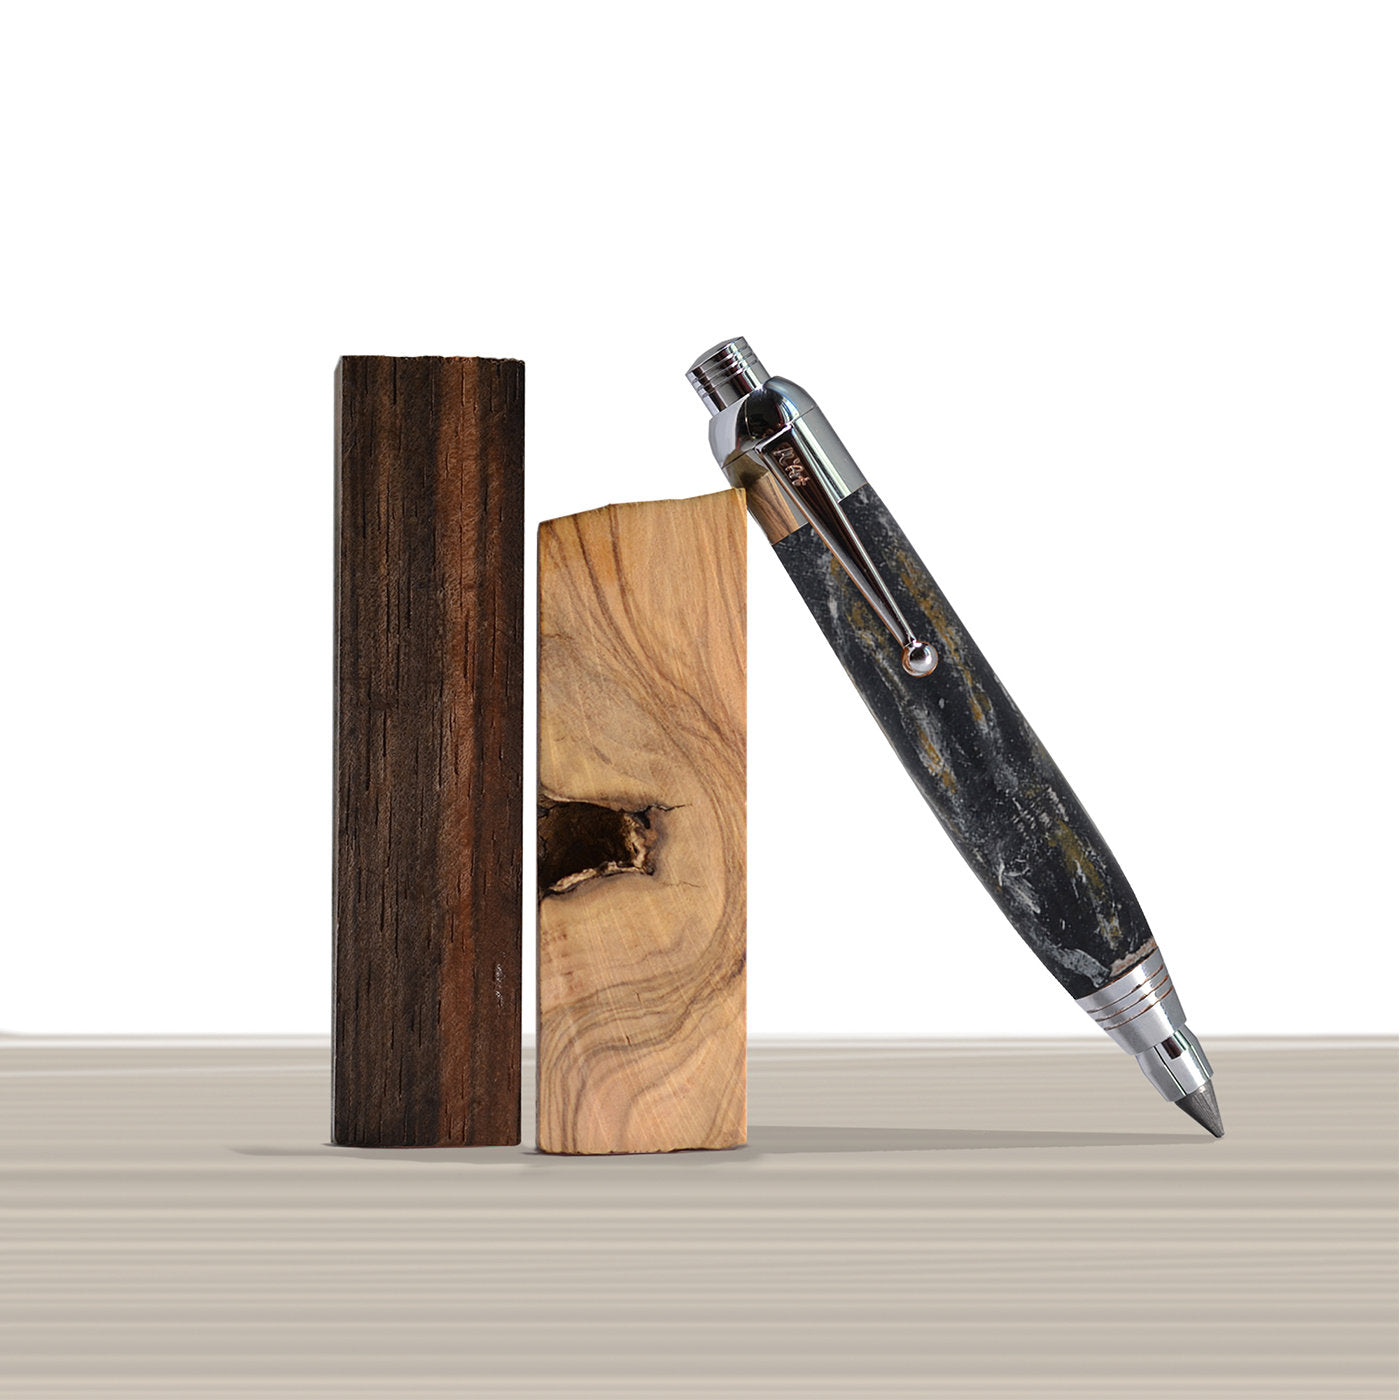 Botero Marbled Black Automatic Pencil in Olive Wood - Alternative view 2